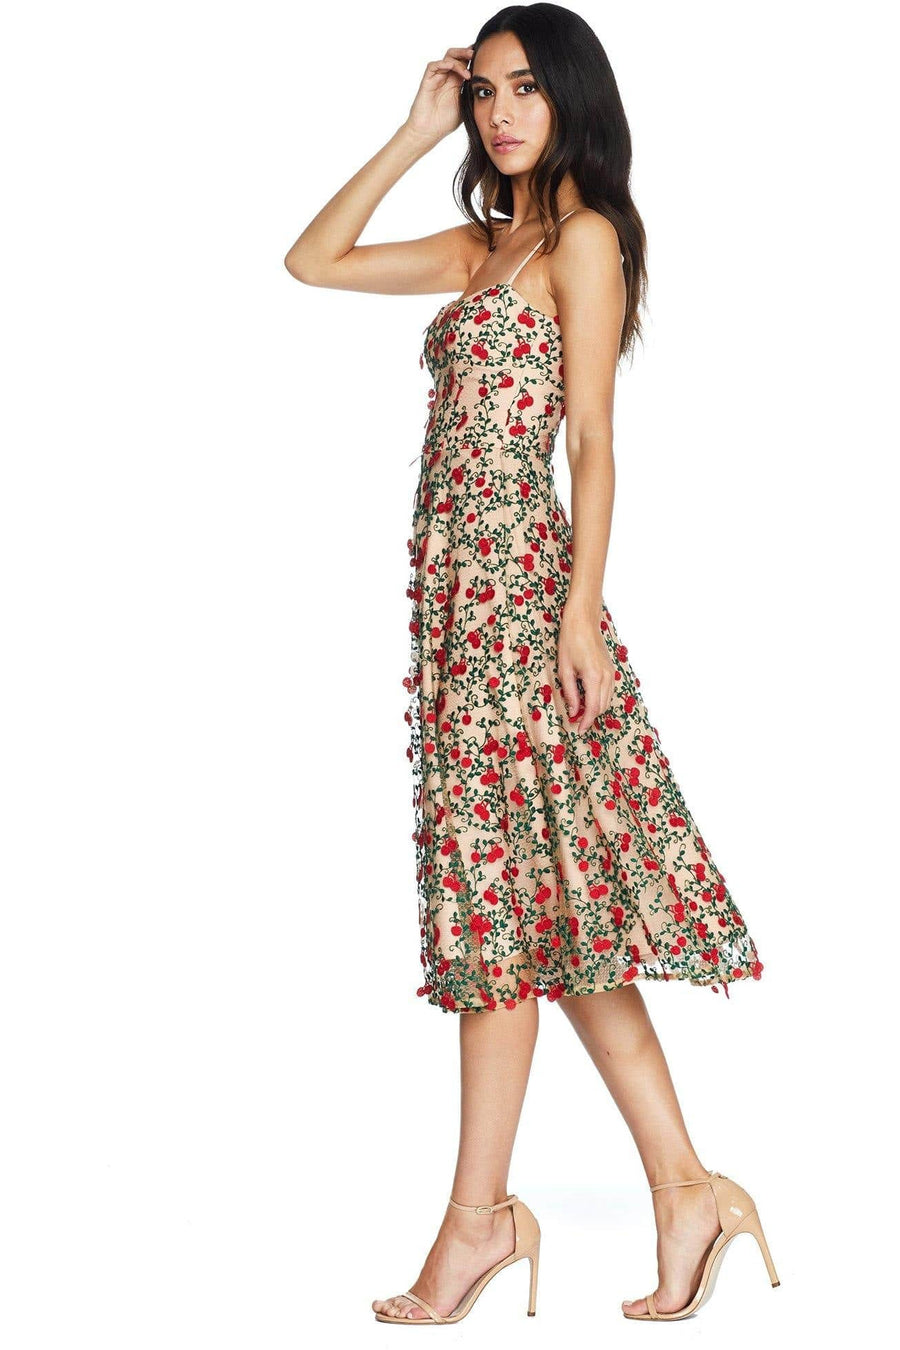 Janice Romantic Embroidered Dress - Dress the Population